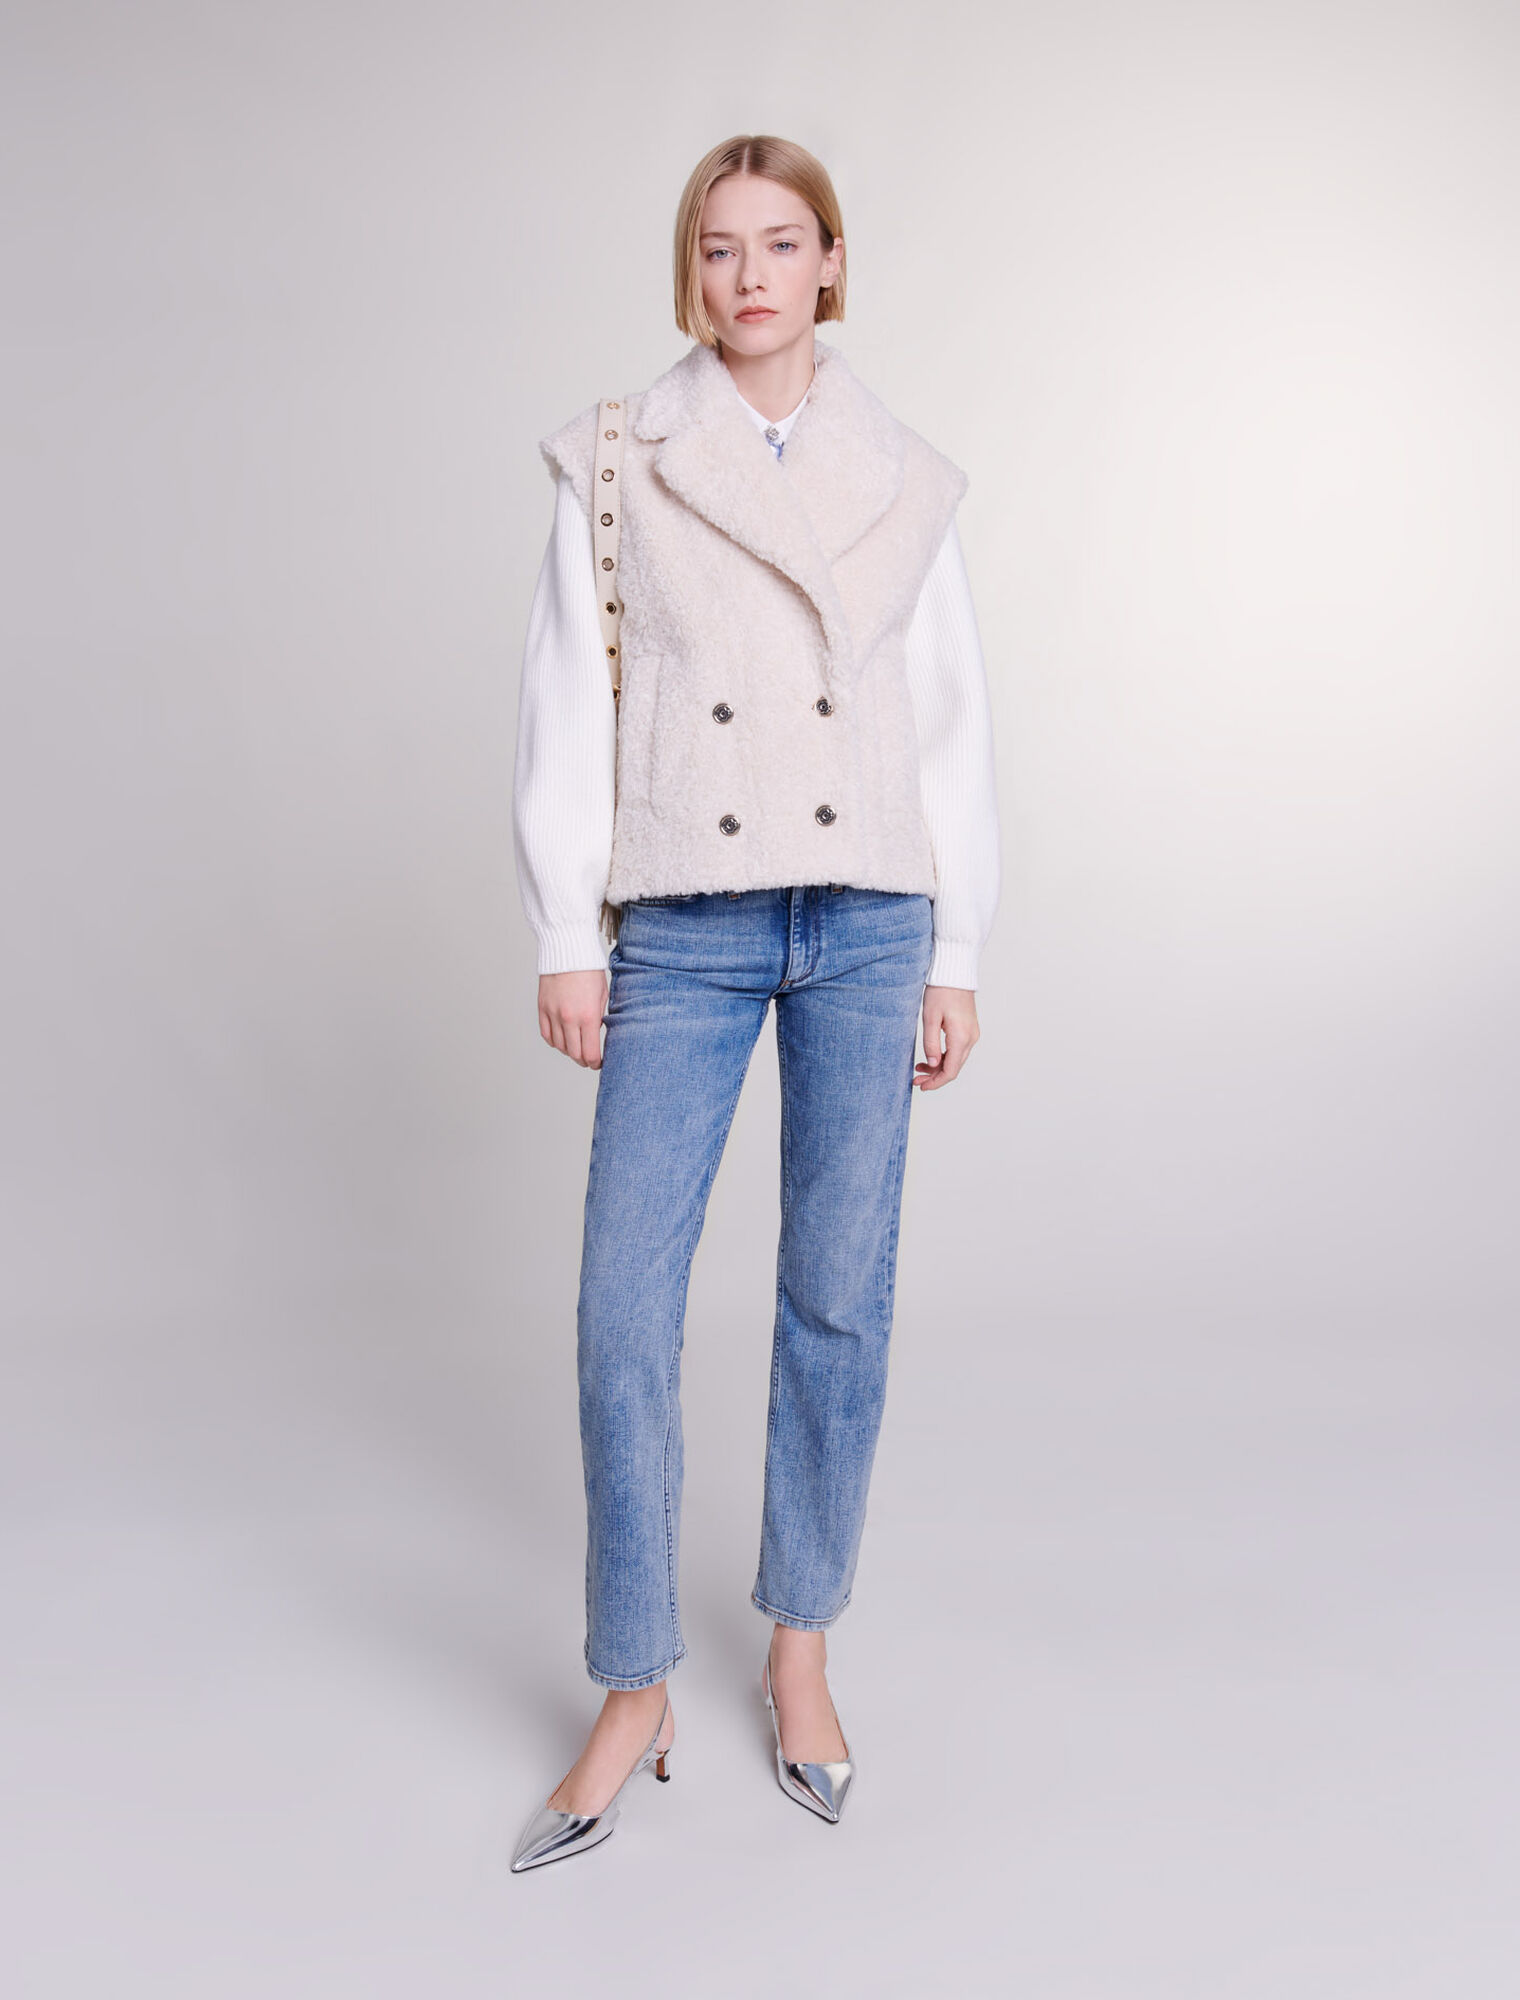 Two-material jacket